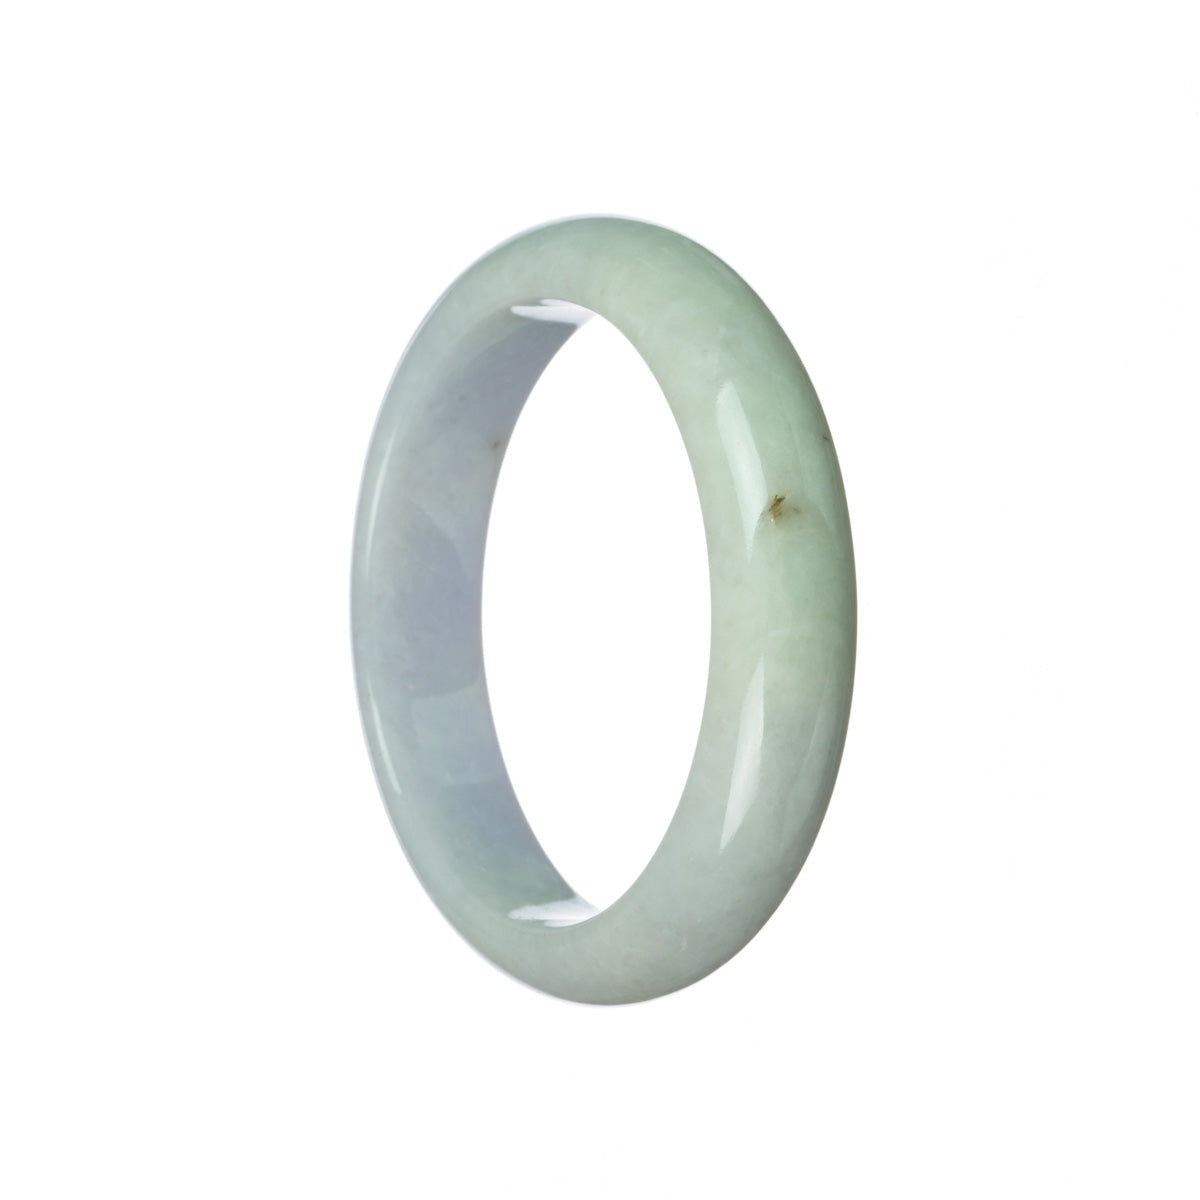 An elegant lavender traditional jade bracelet in a 58mm half moon shape, certified Type A jade. Perfect for adding a touch of natural beauty to any outfit.